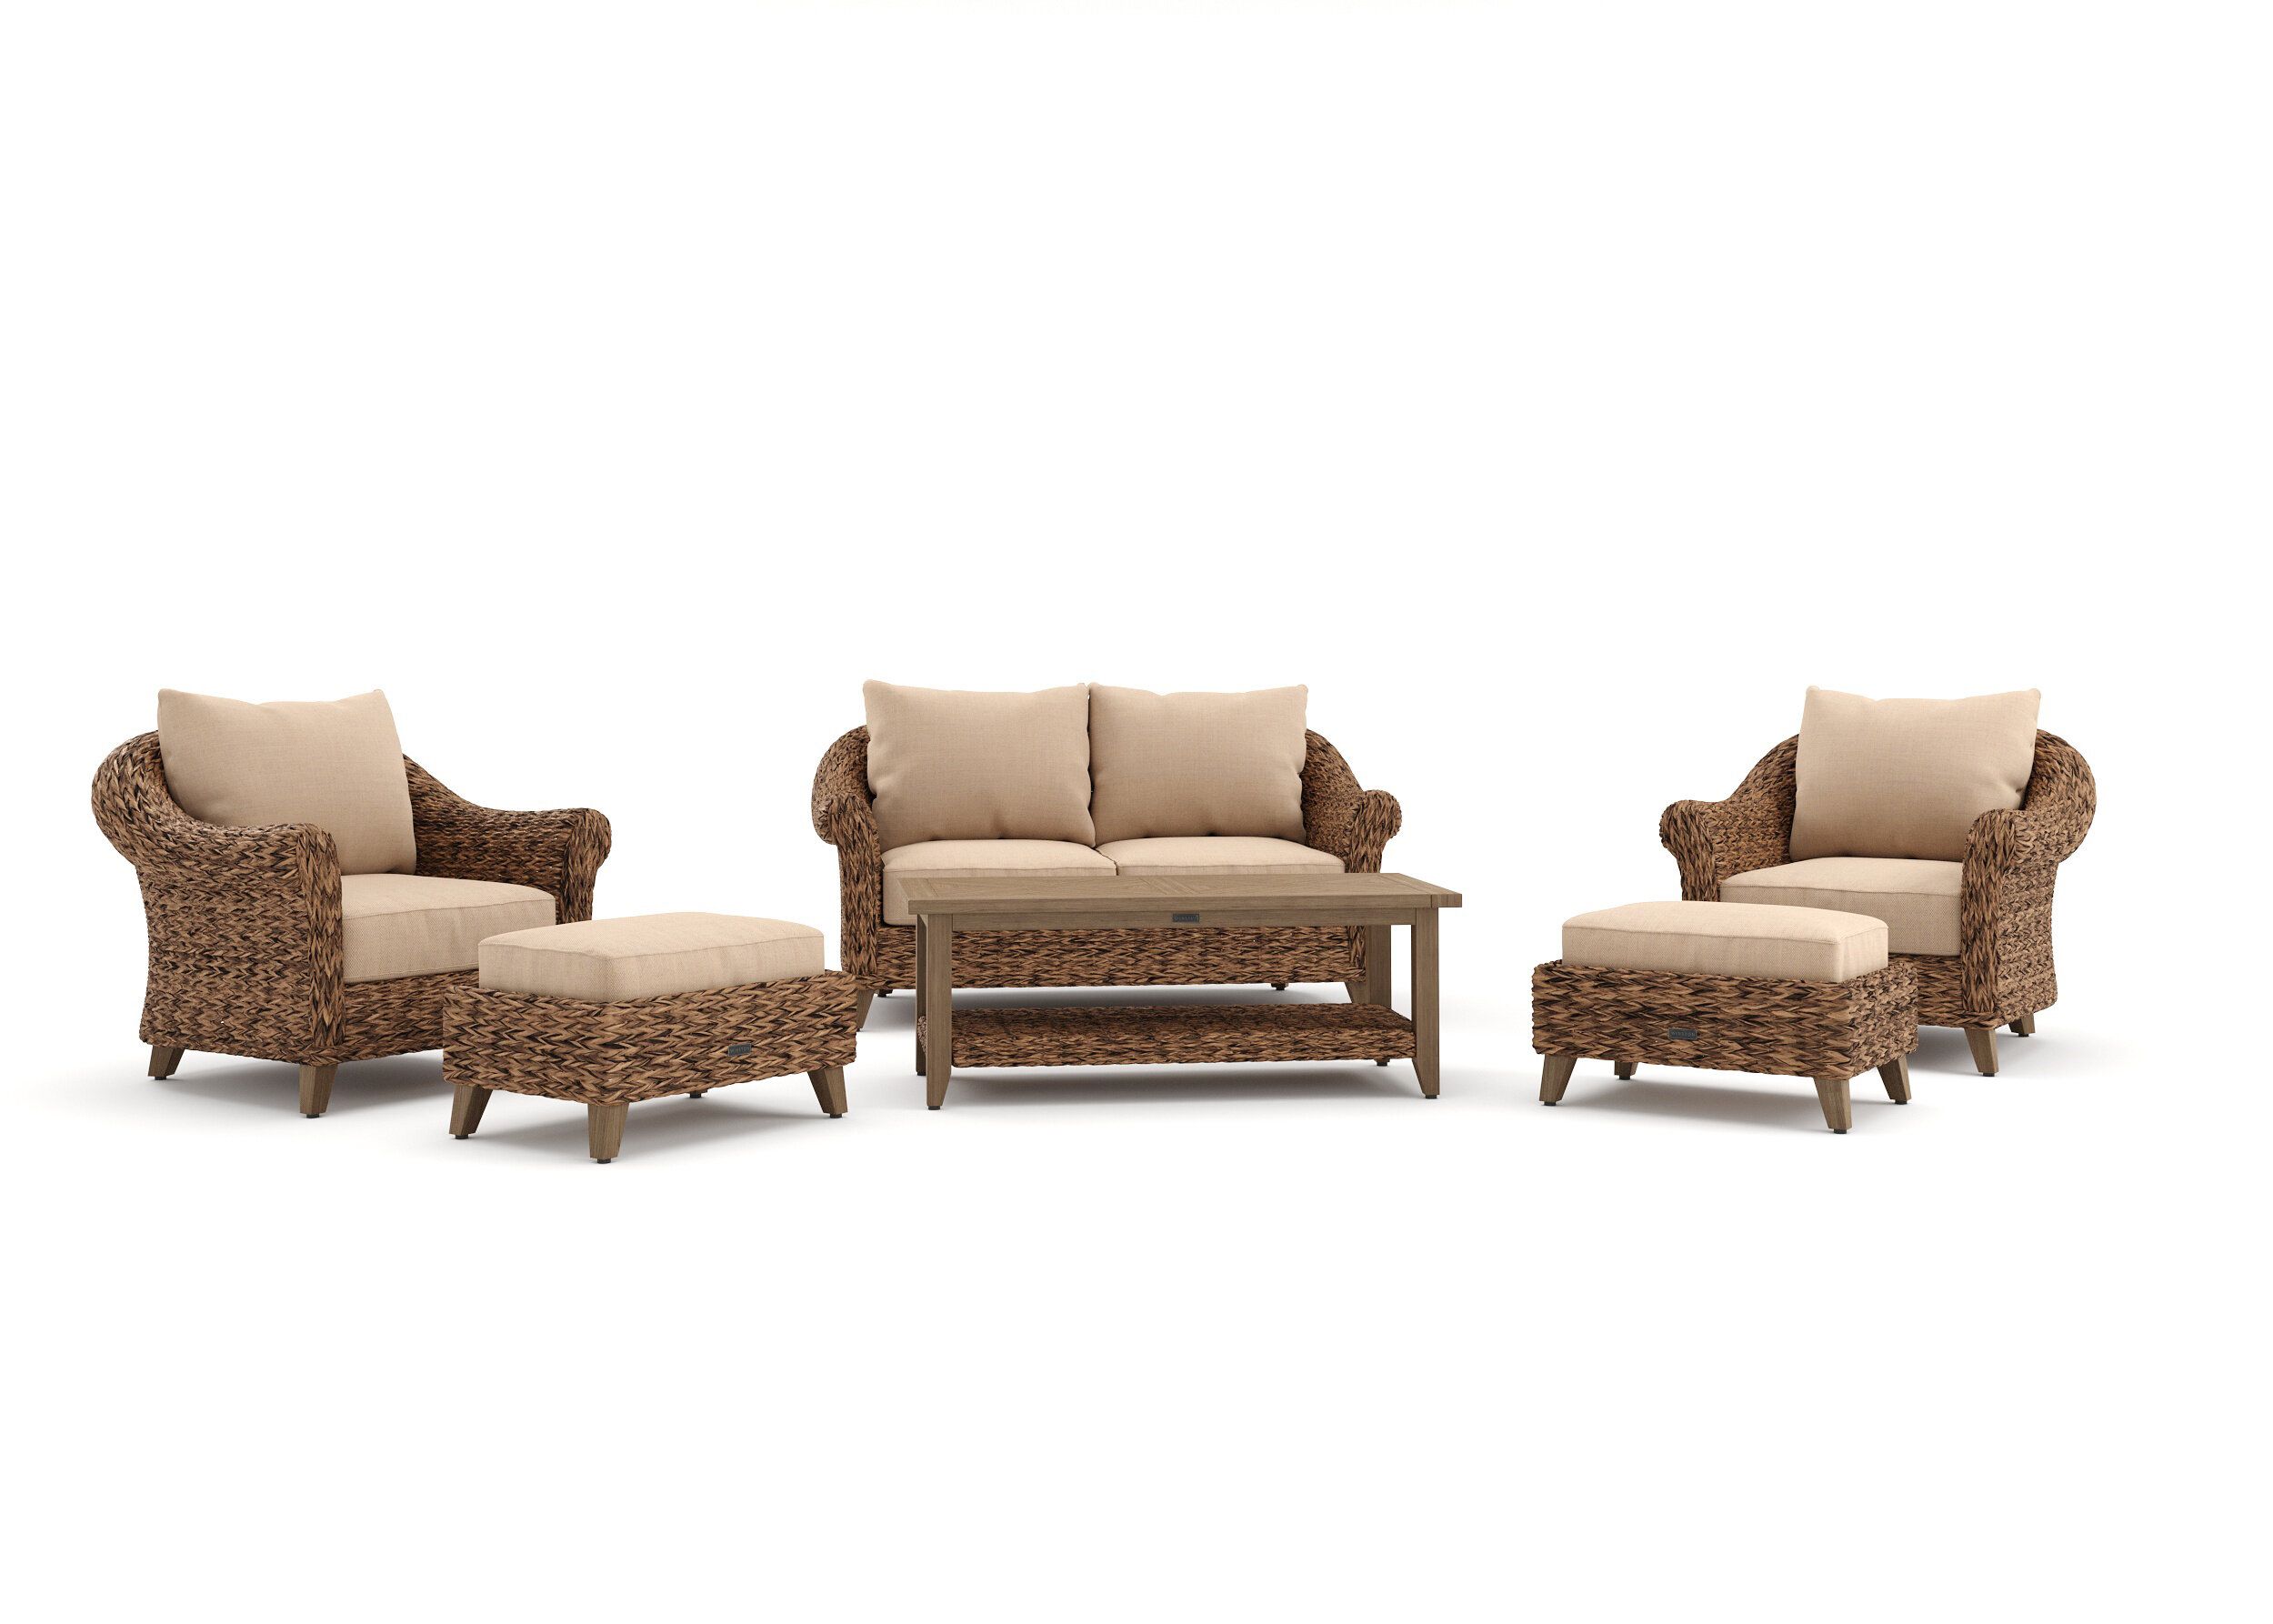 Winston Cayman Loveseat, Stationary Lounge Chair, Ottoman, And Coffee Table  6 Piece Rattan Seating Group With Sunbrella Cushions | Perigold For Cushioned Chair Loveseat Tables (View 14 of 15)